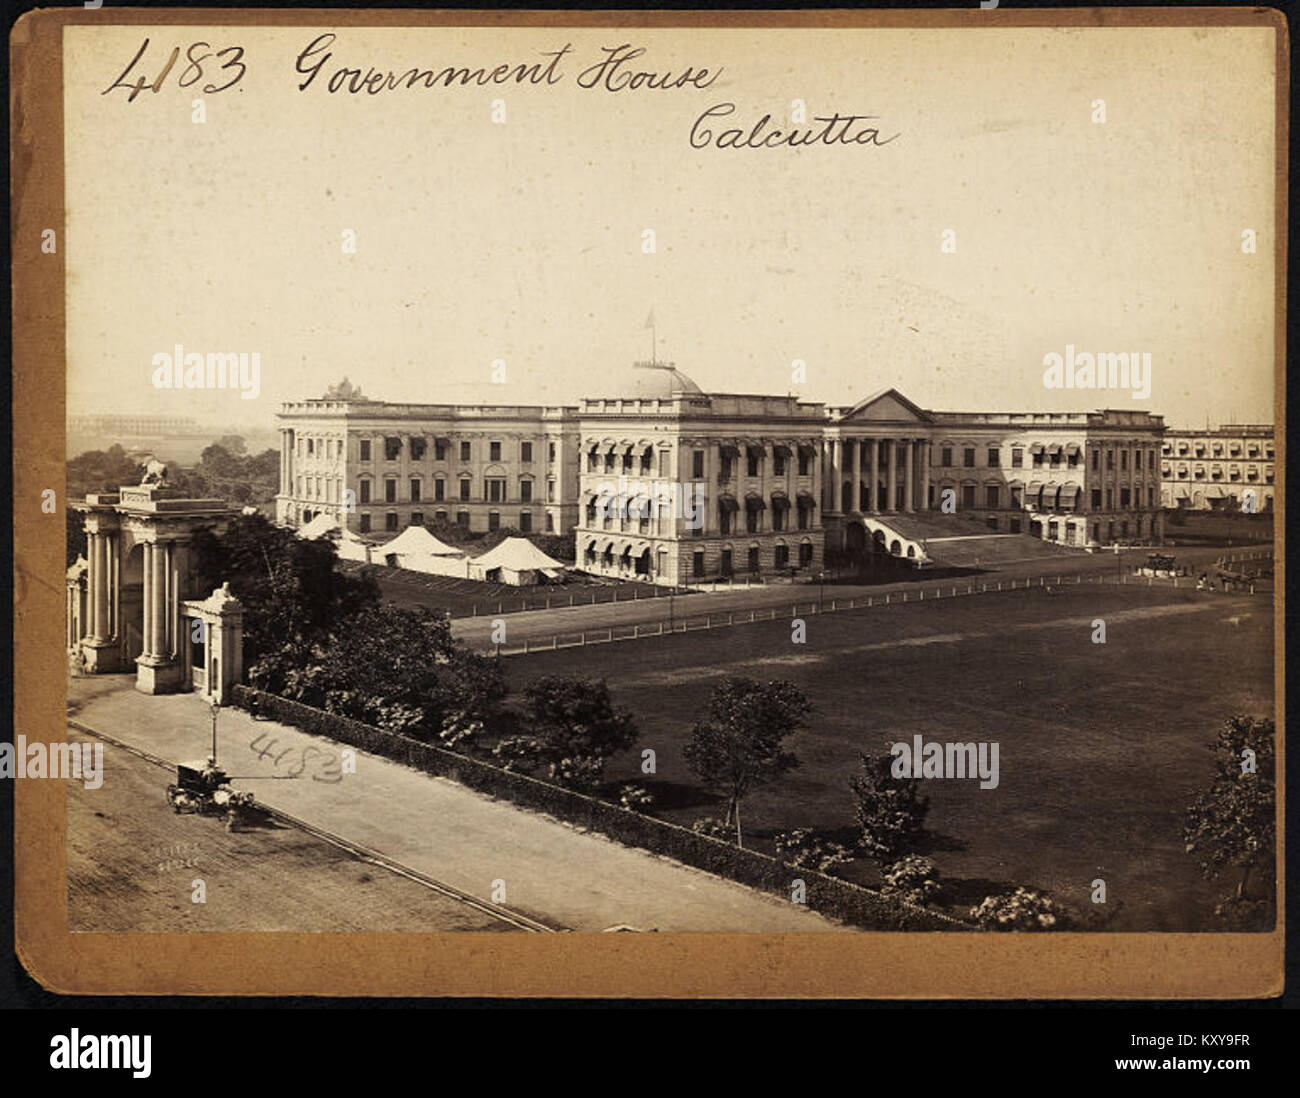 Government House, Calcutta by Francis Frith (2) Stock Photo